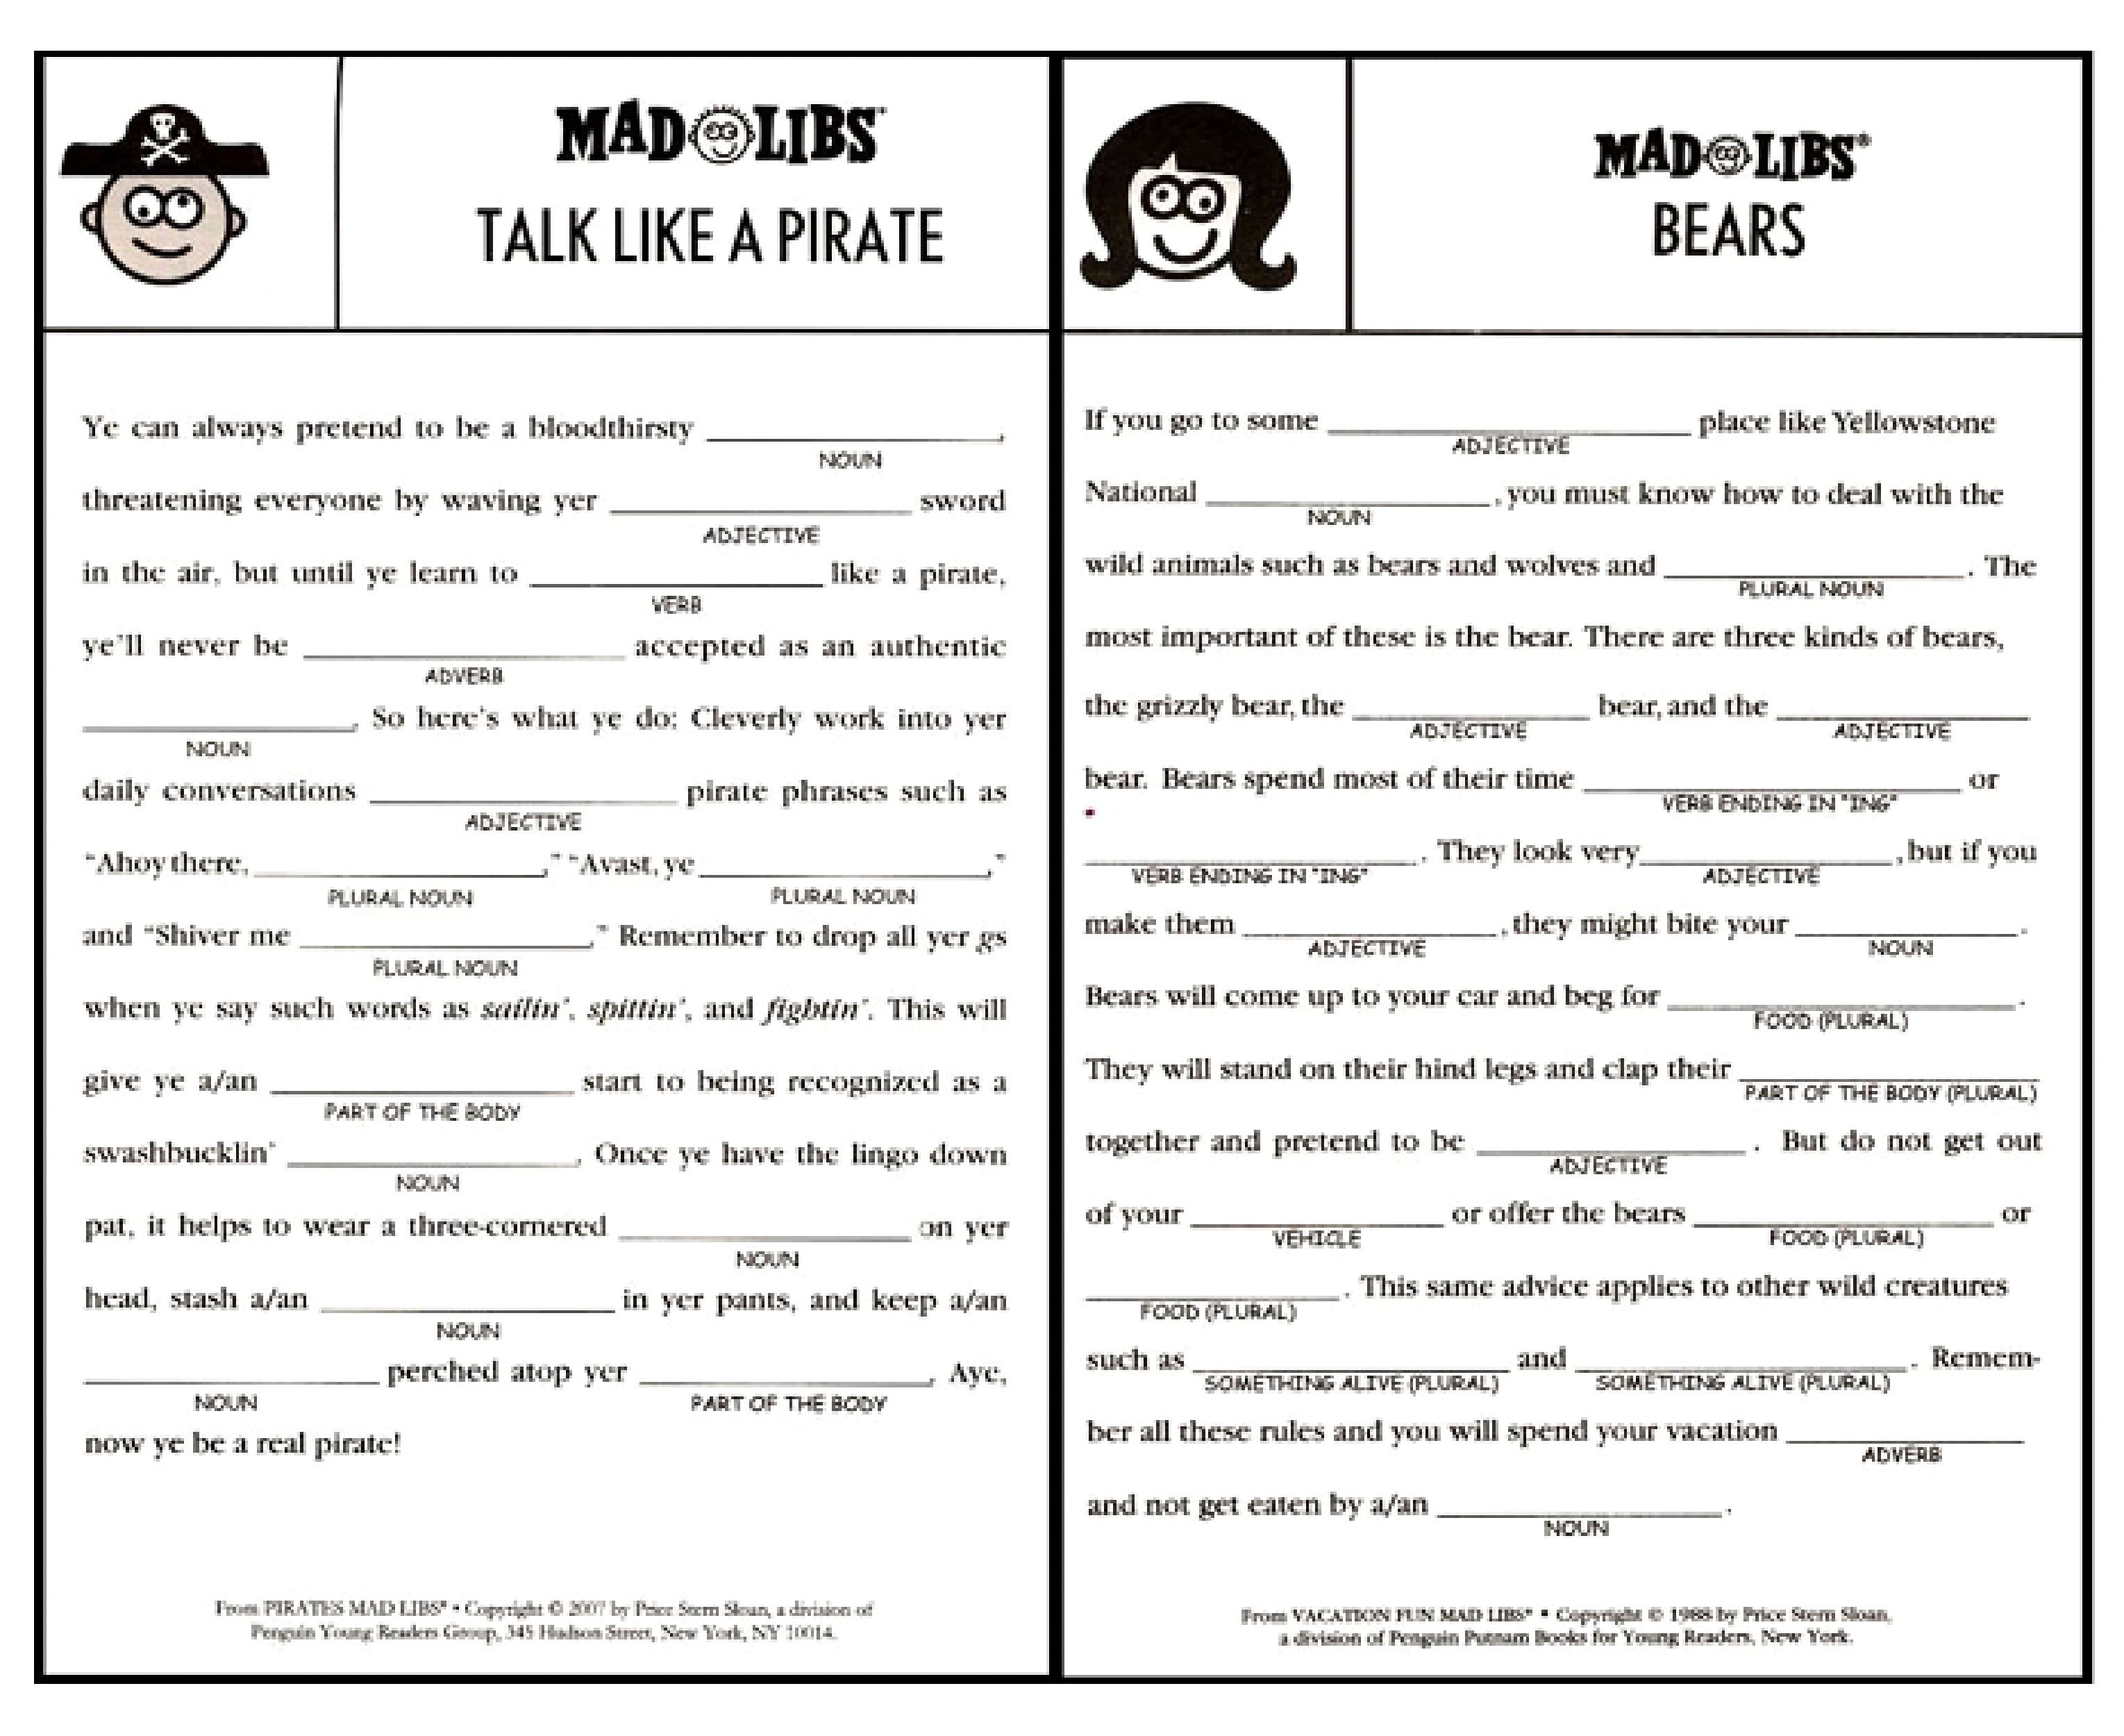 Printable Mad Libs Sheets For Adults - Google Search | Camping - Free Printable Mad Libs